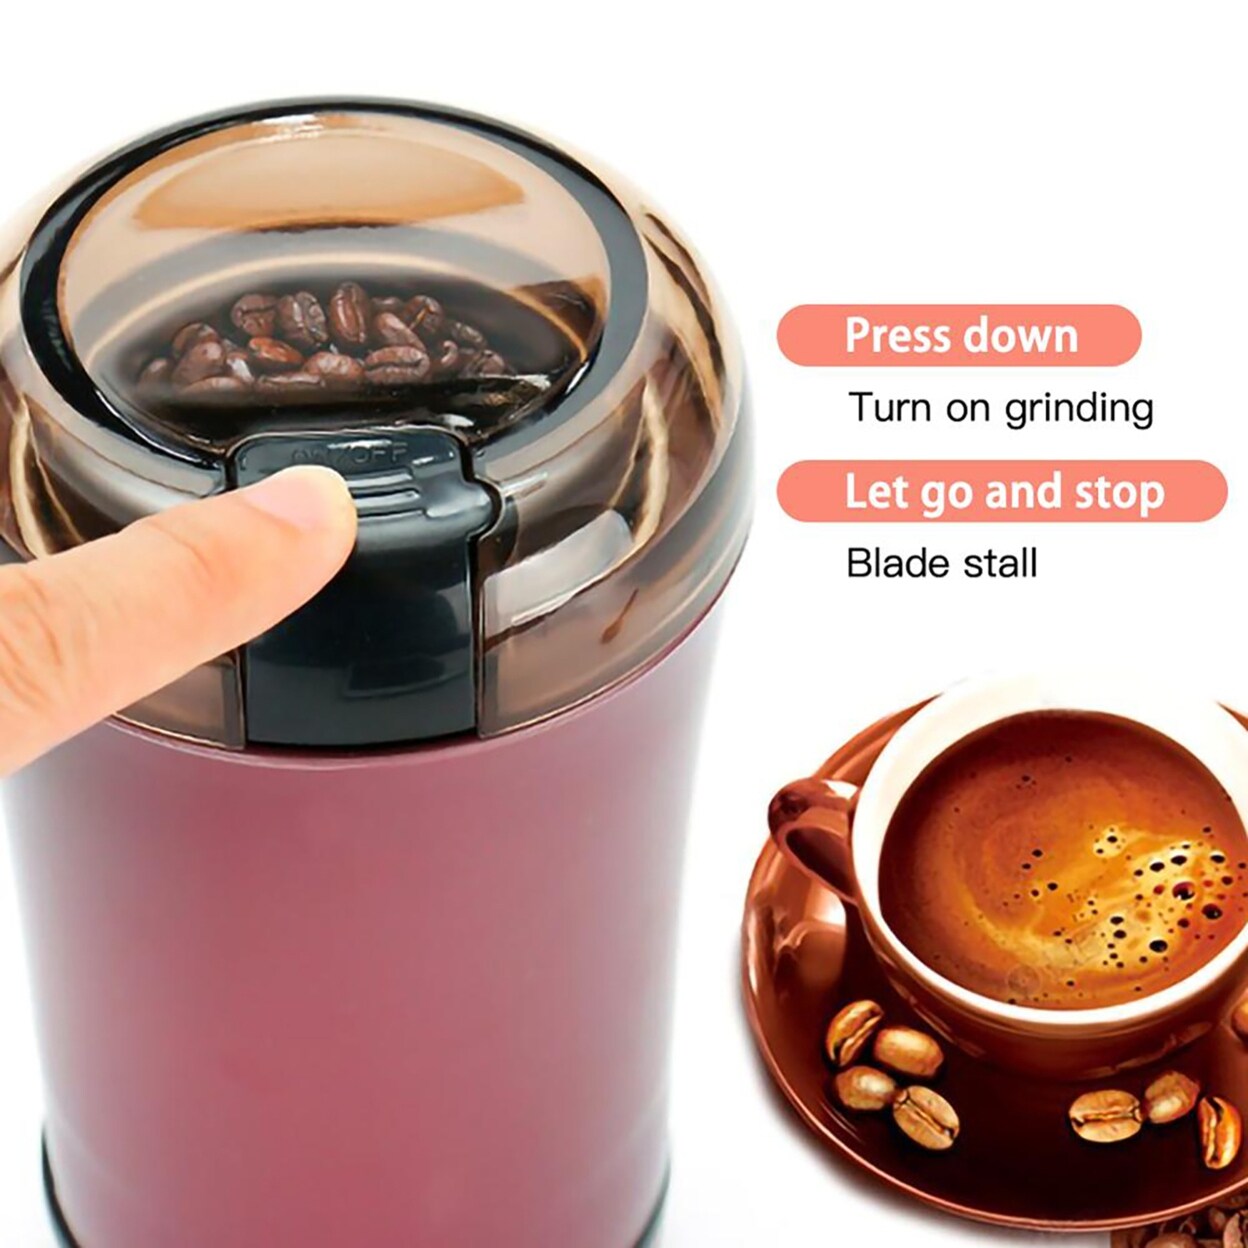 https://ak1.ostkcdn.com/images/products/is/images/direct/f0045cbb1ef4e084a03f0a4cc47cdbdc5d41f0c1/Electric-Grain-Grinder-Spice-Coffee-Grinding-Machine-Household-Herbal-Crusher.jpg